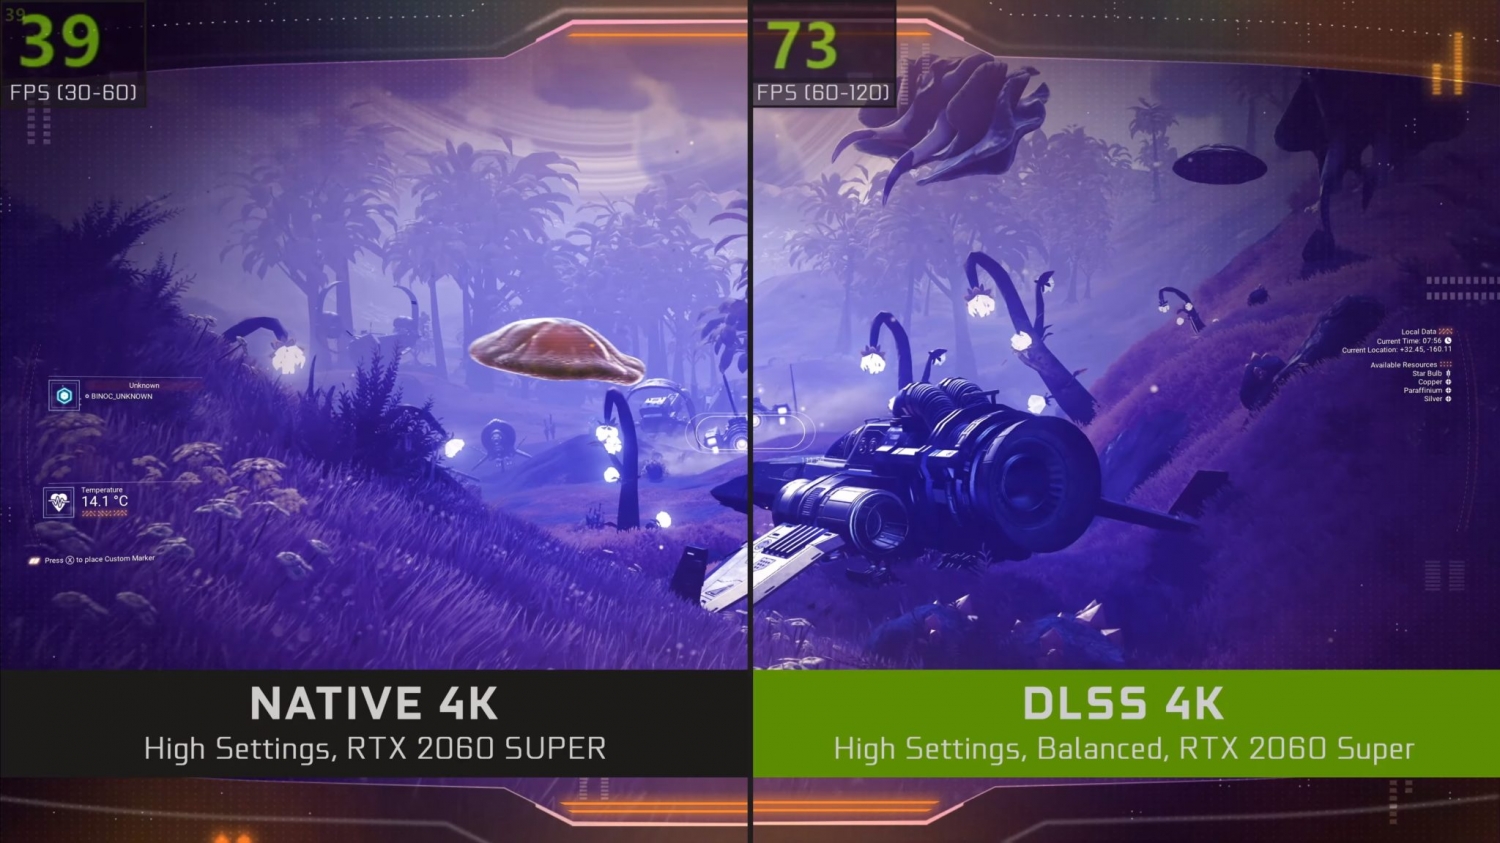 No Man's Sky update NVIDIA DLSS tech support, visual upgrades